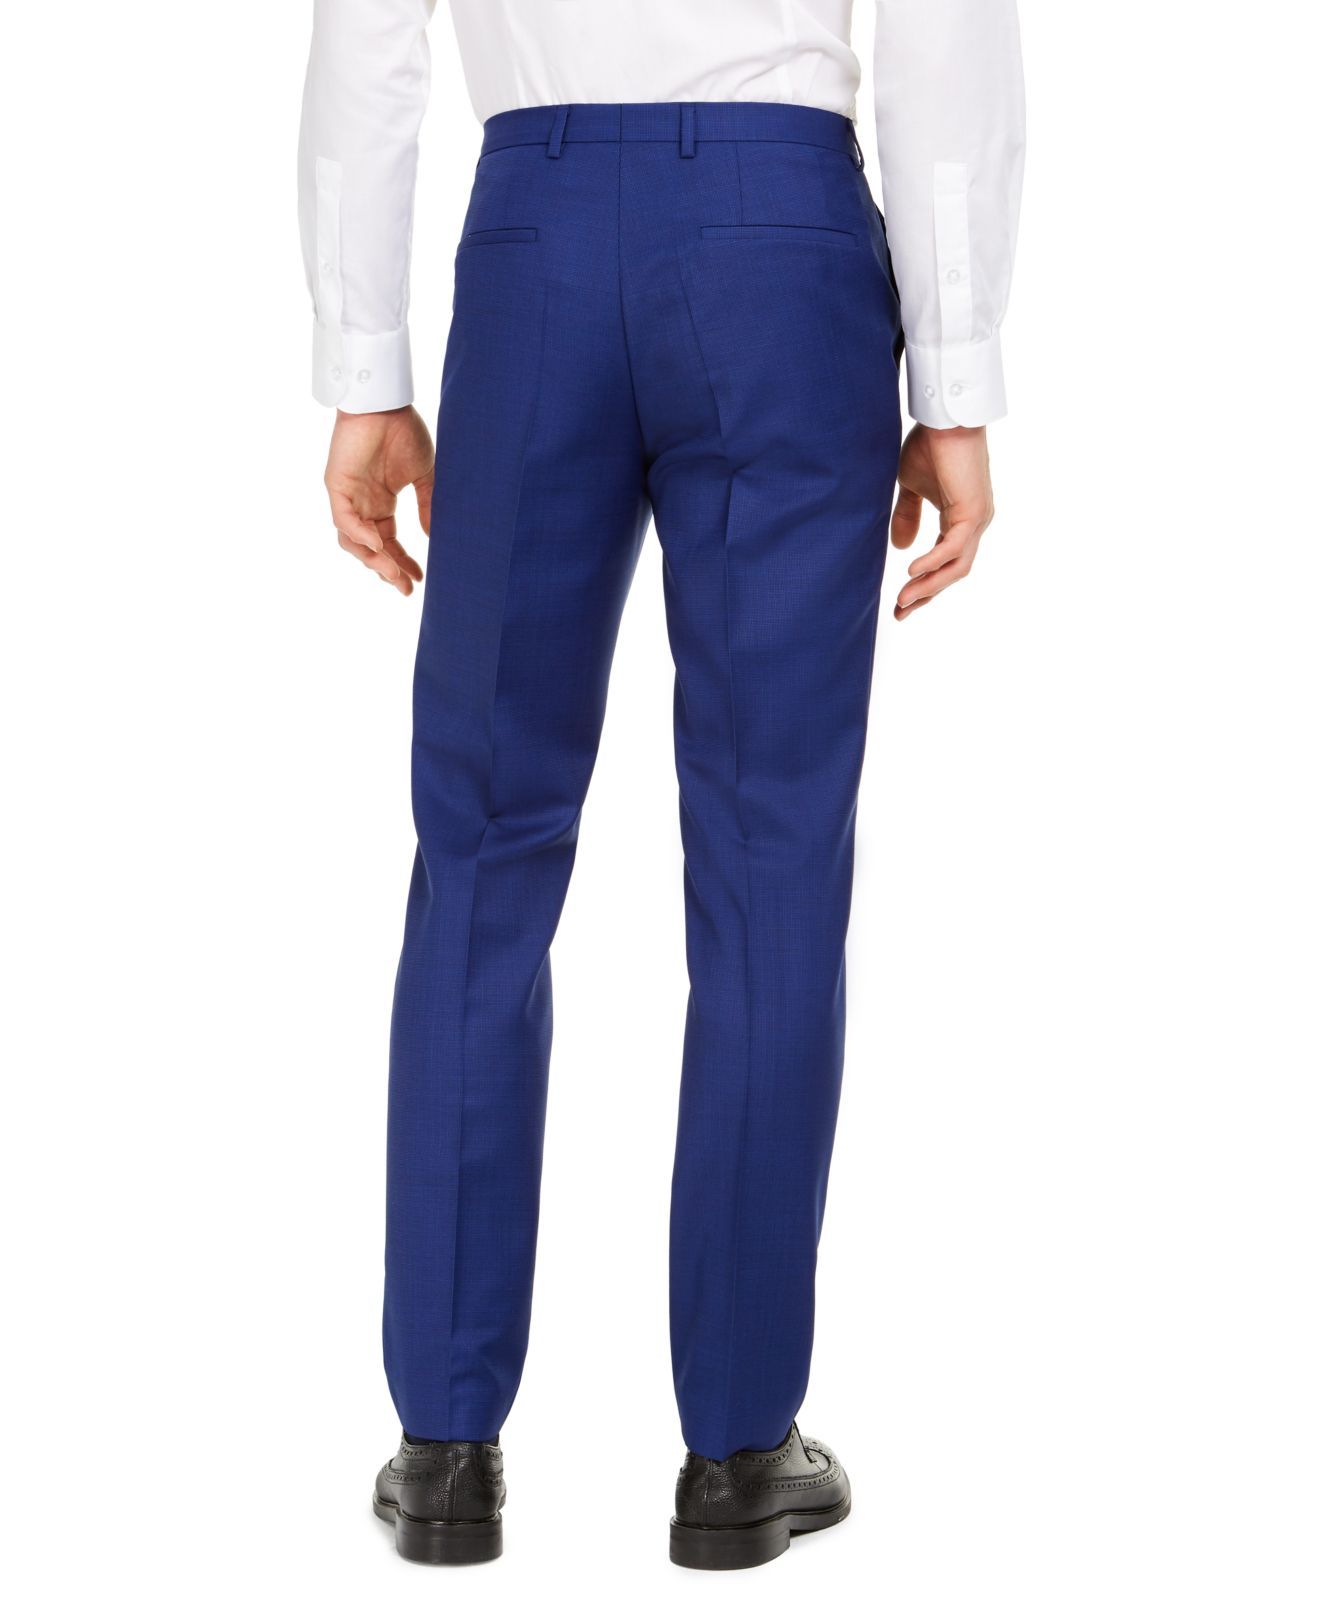 Color: Blues Size Type: Regular Bottoms Size (Men's): 34 Inseam: 32 Type: Pants Style: Dress Pants Occasion: Formal Material: Wool Blends